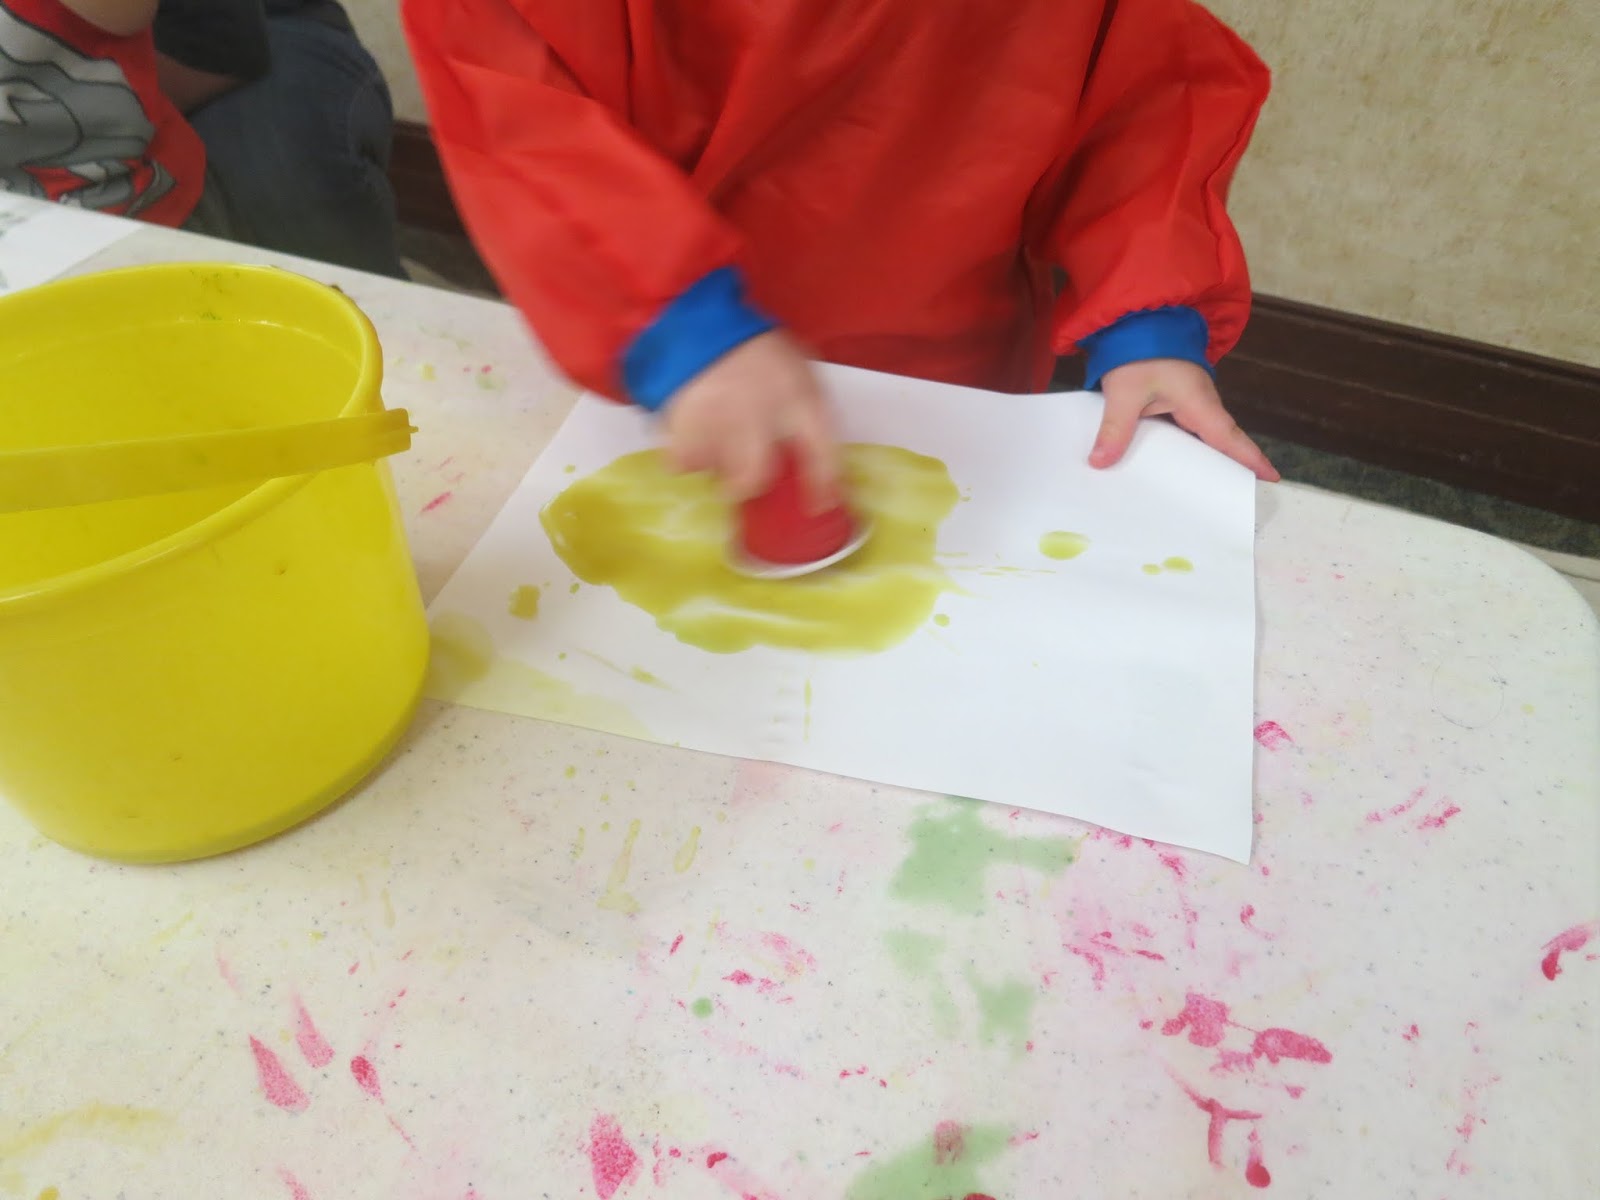 library makers: Toddler Art Class: Crumpled paintings